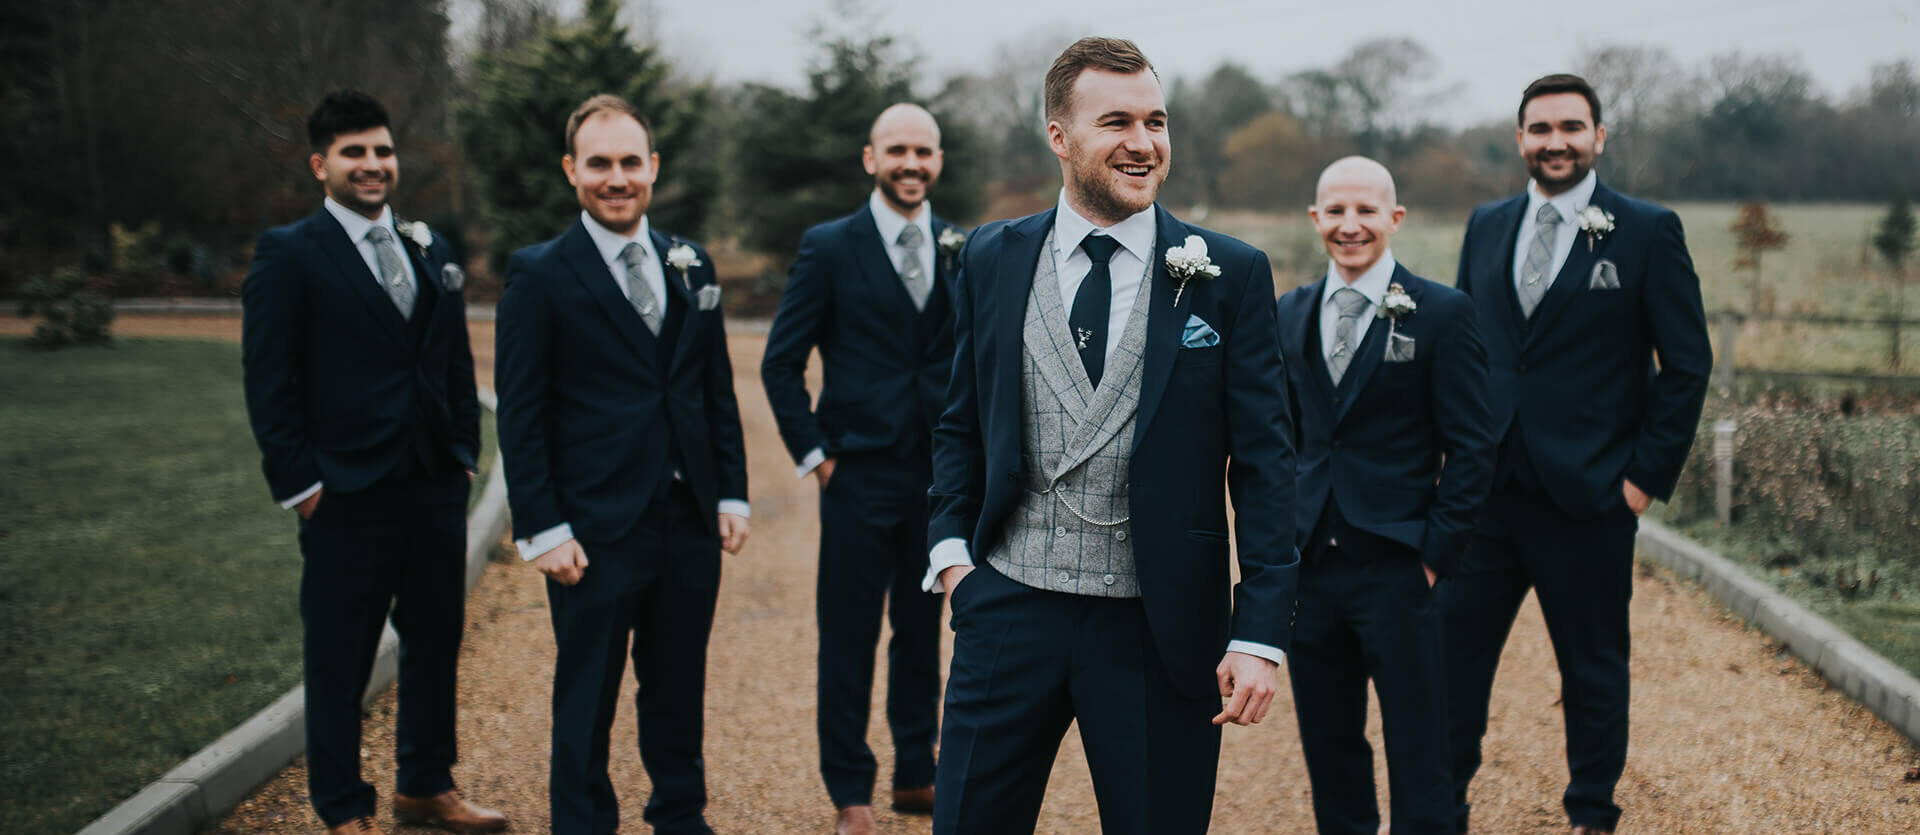 The groom and his ushers found the perfect photo opportunity at the beautiful Hampshire wedding venue